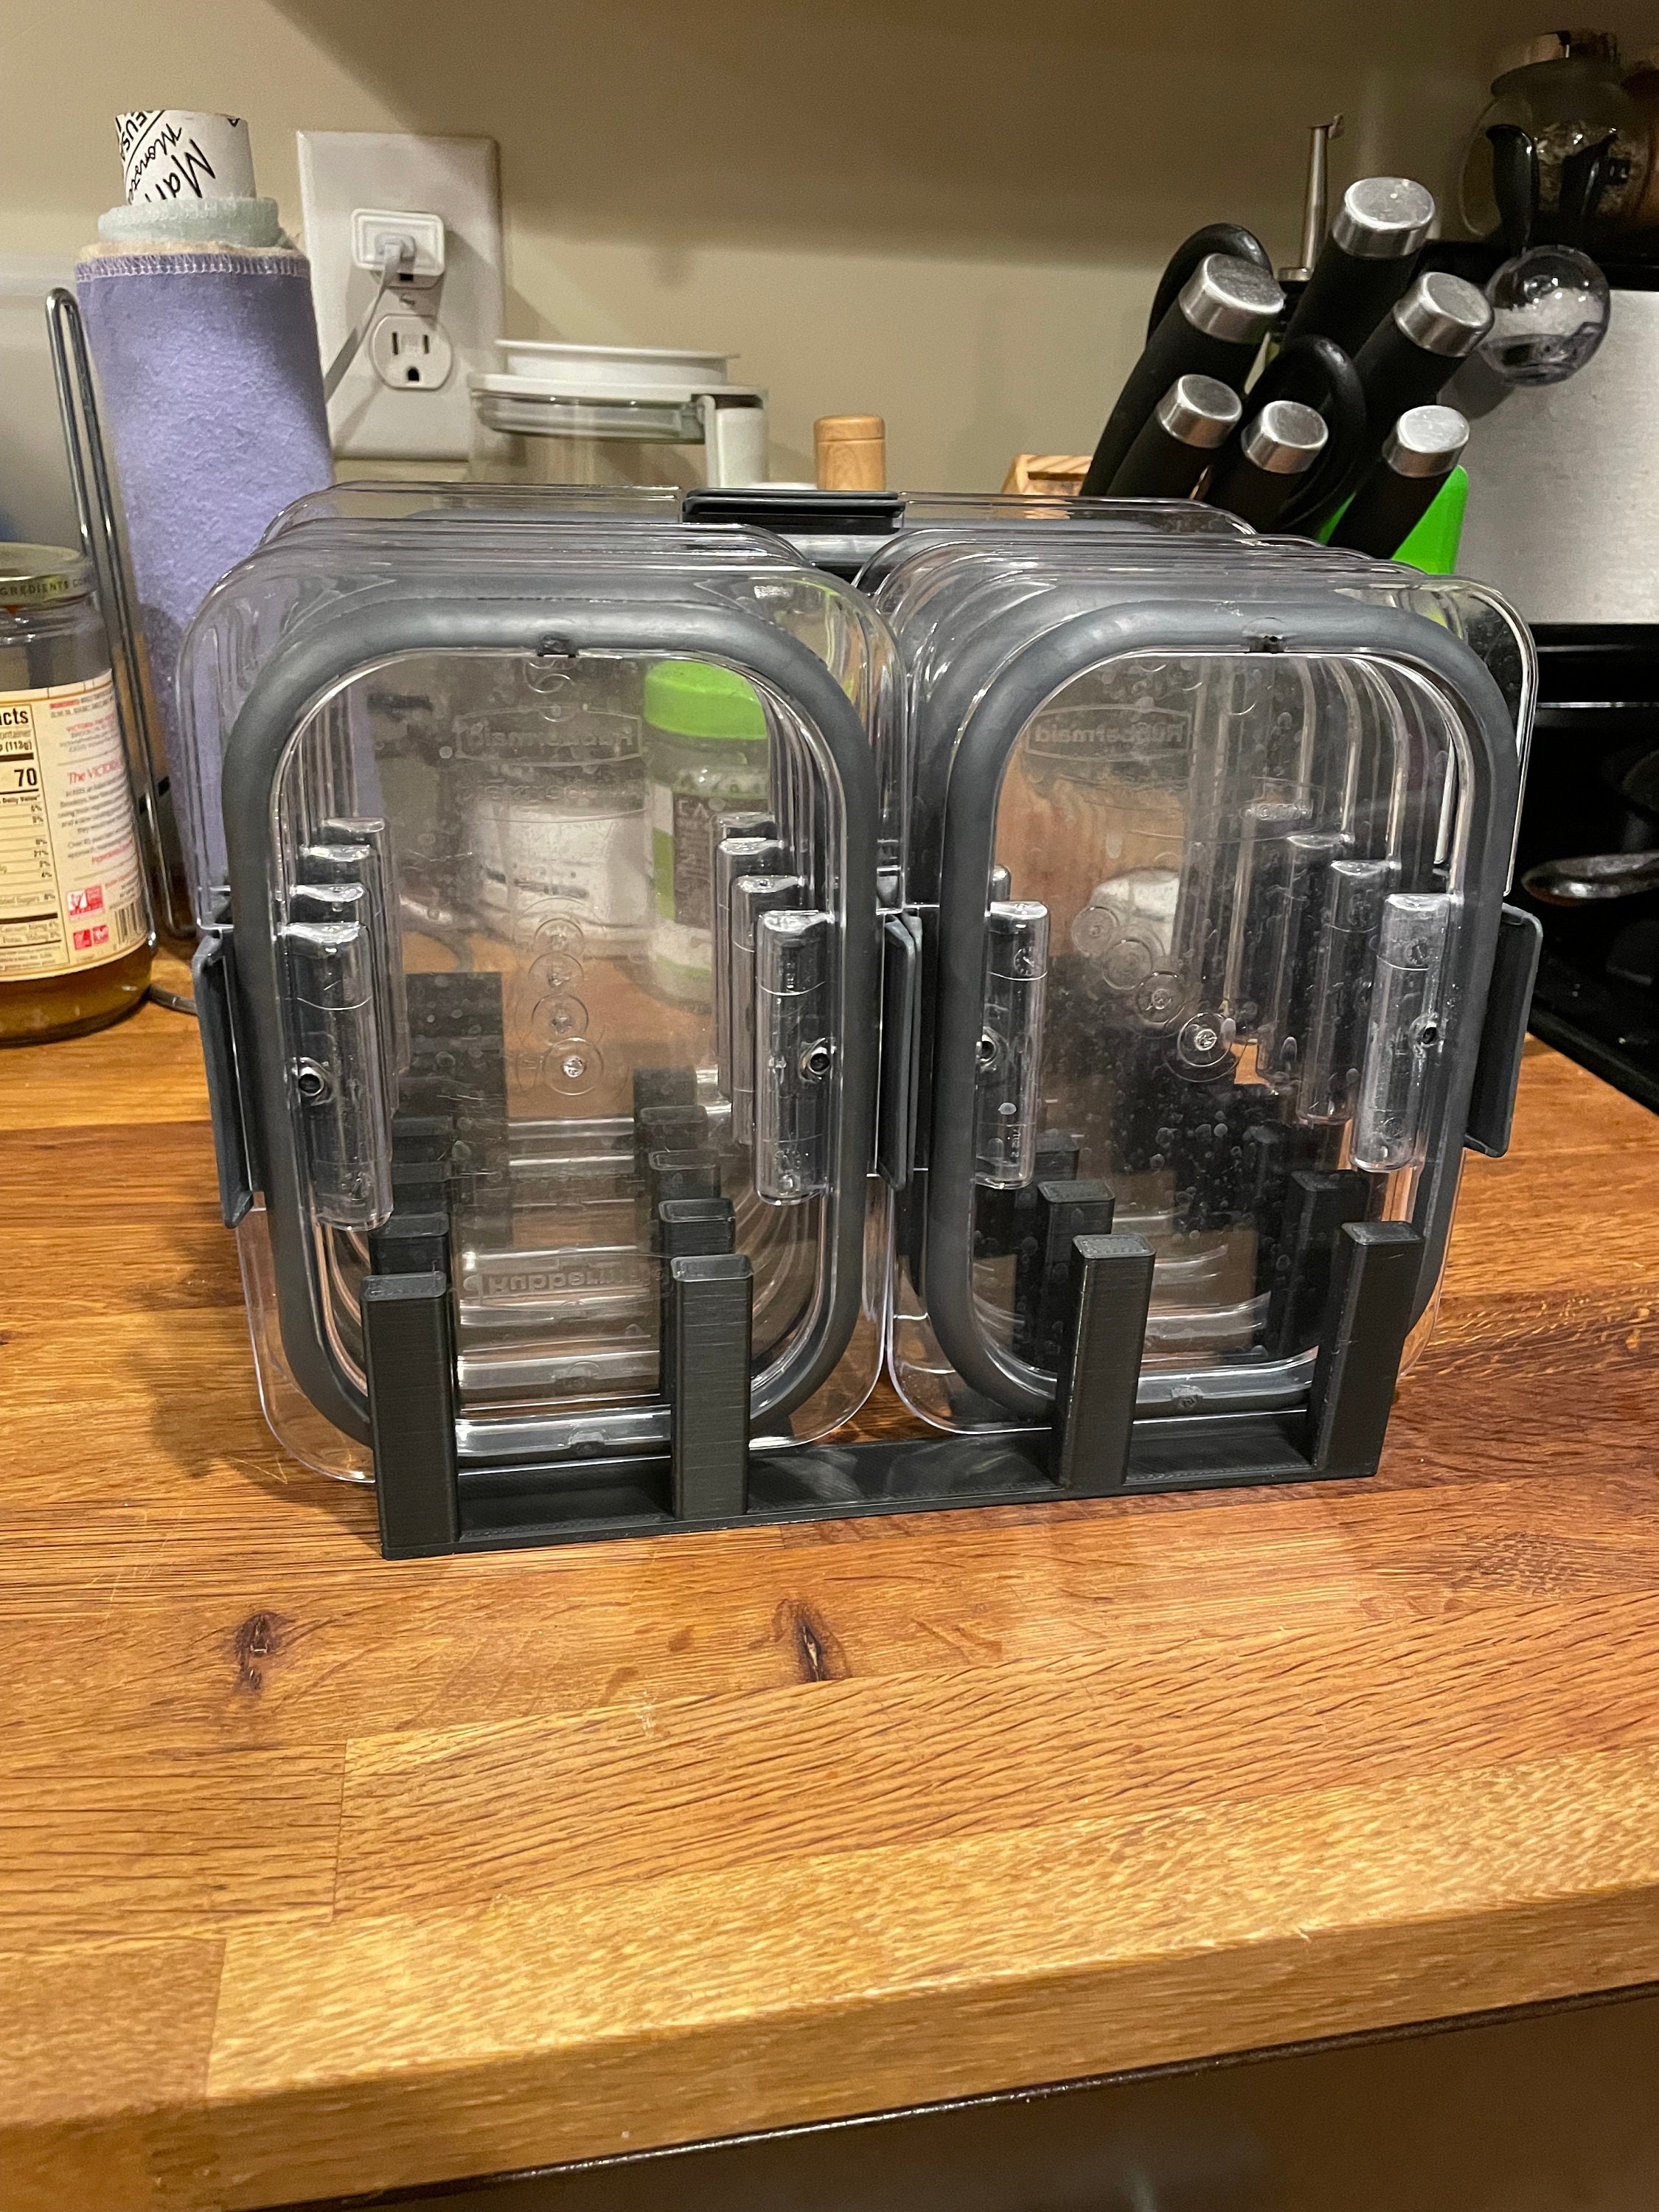 Rubbermaid Brilliance Food Storage Containers Set - Zars Buy